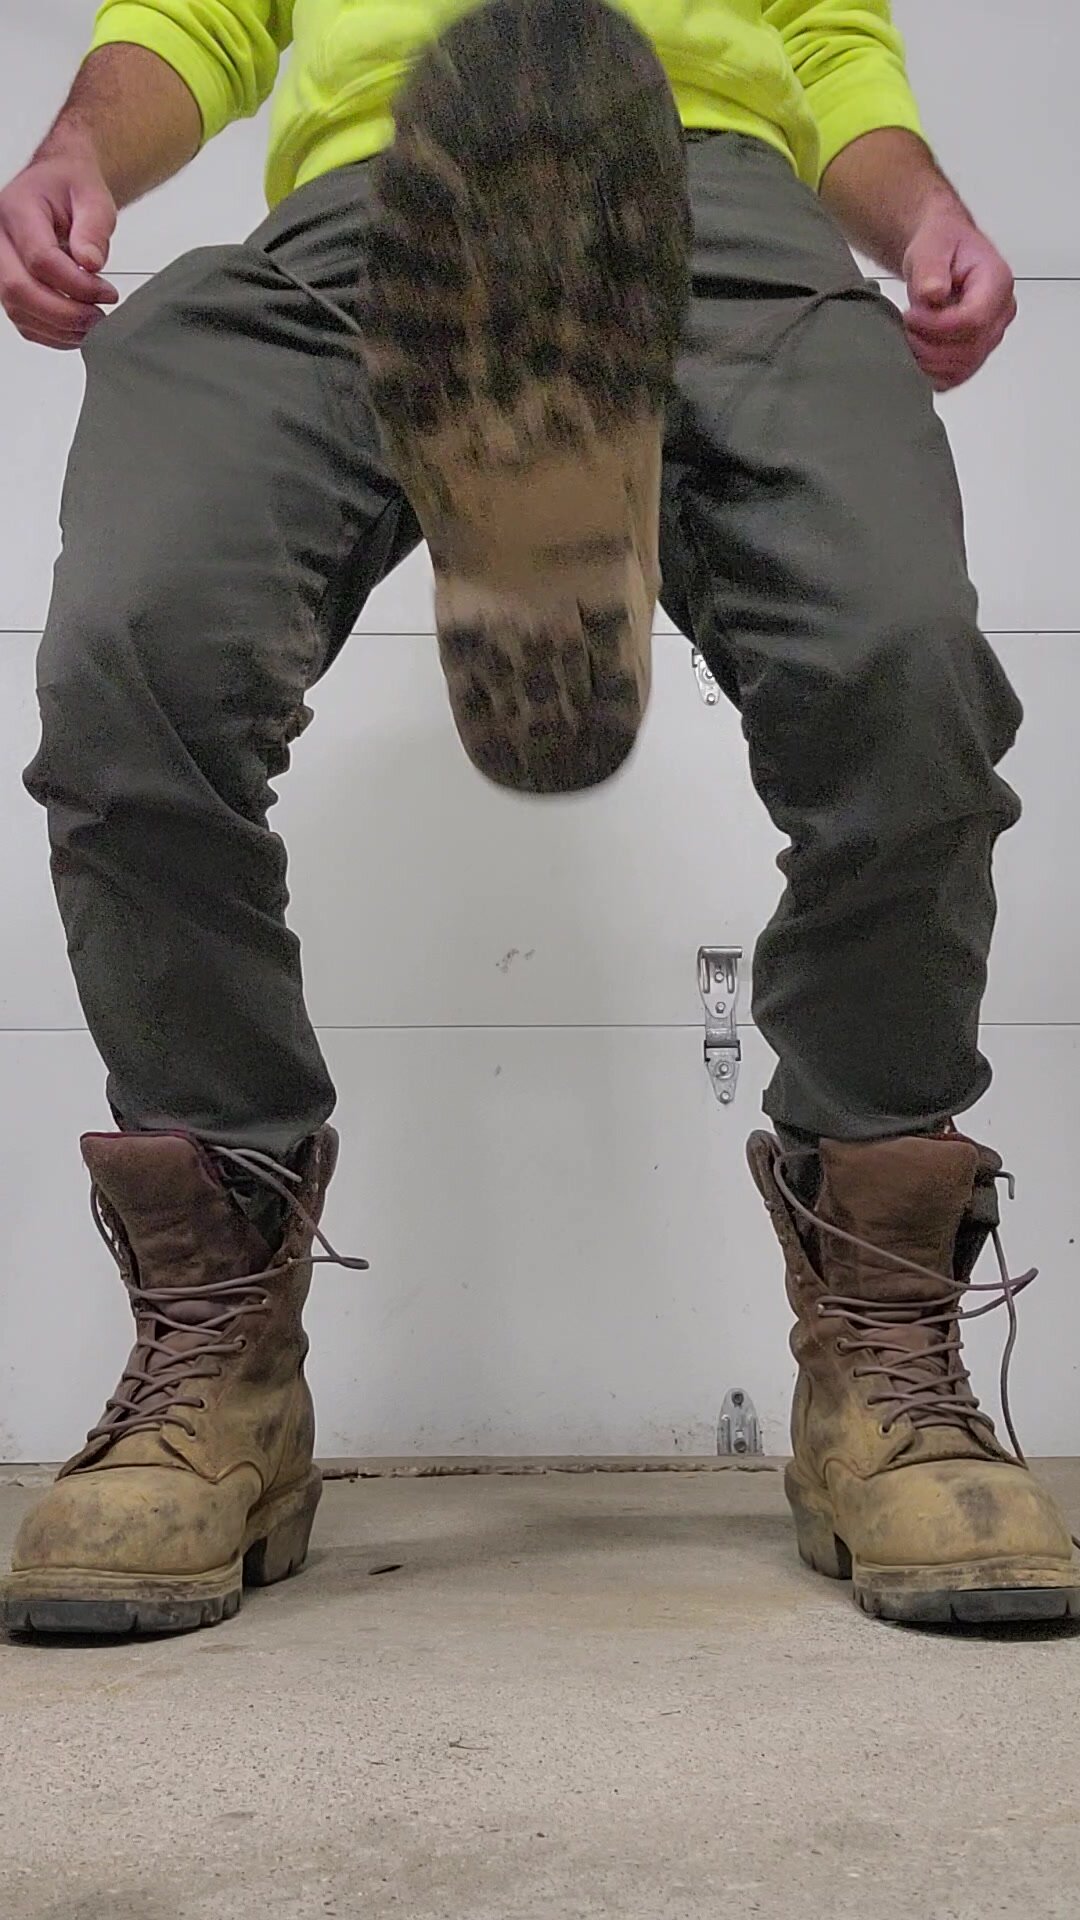 Nutting on my Timberland Ripsaw Loggers